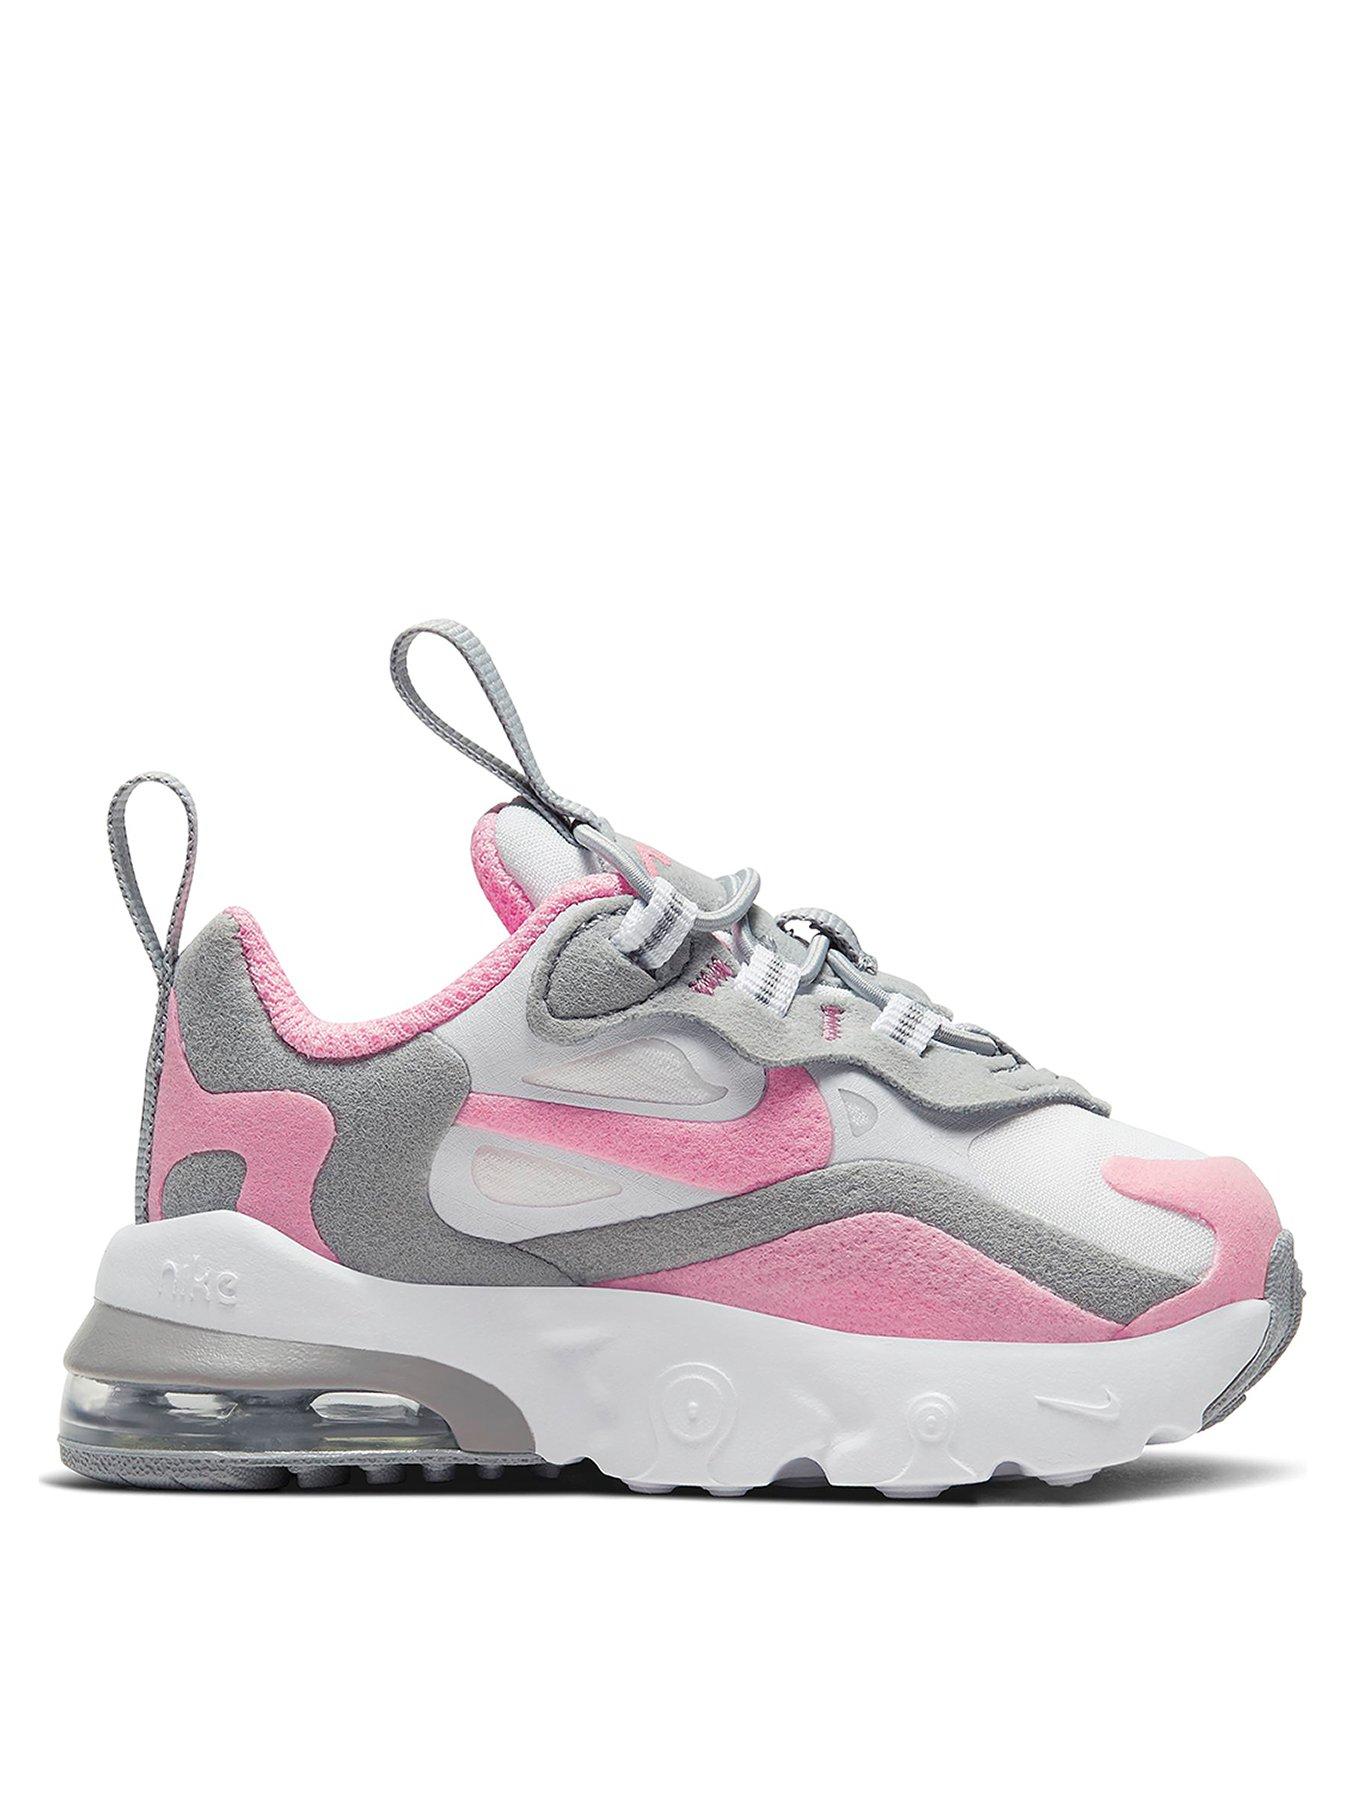 nike air max 270 react pink and grey trainers